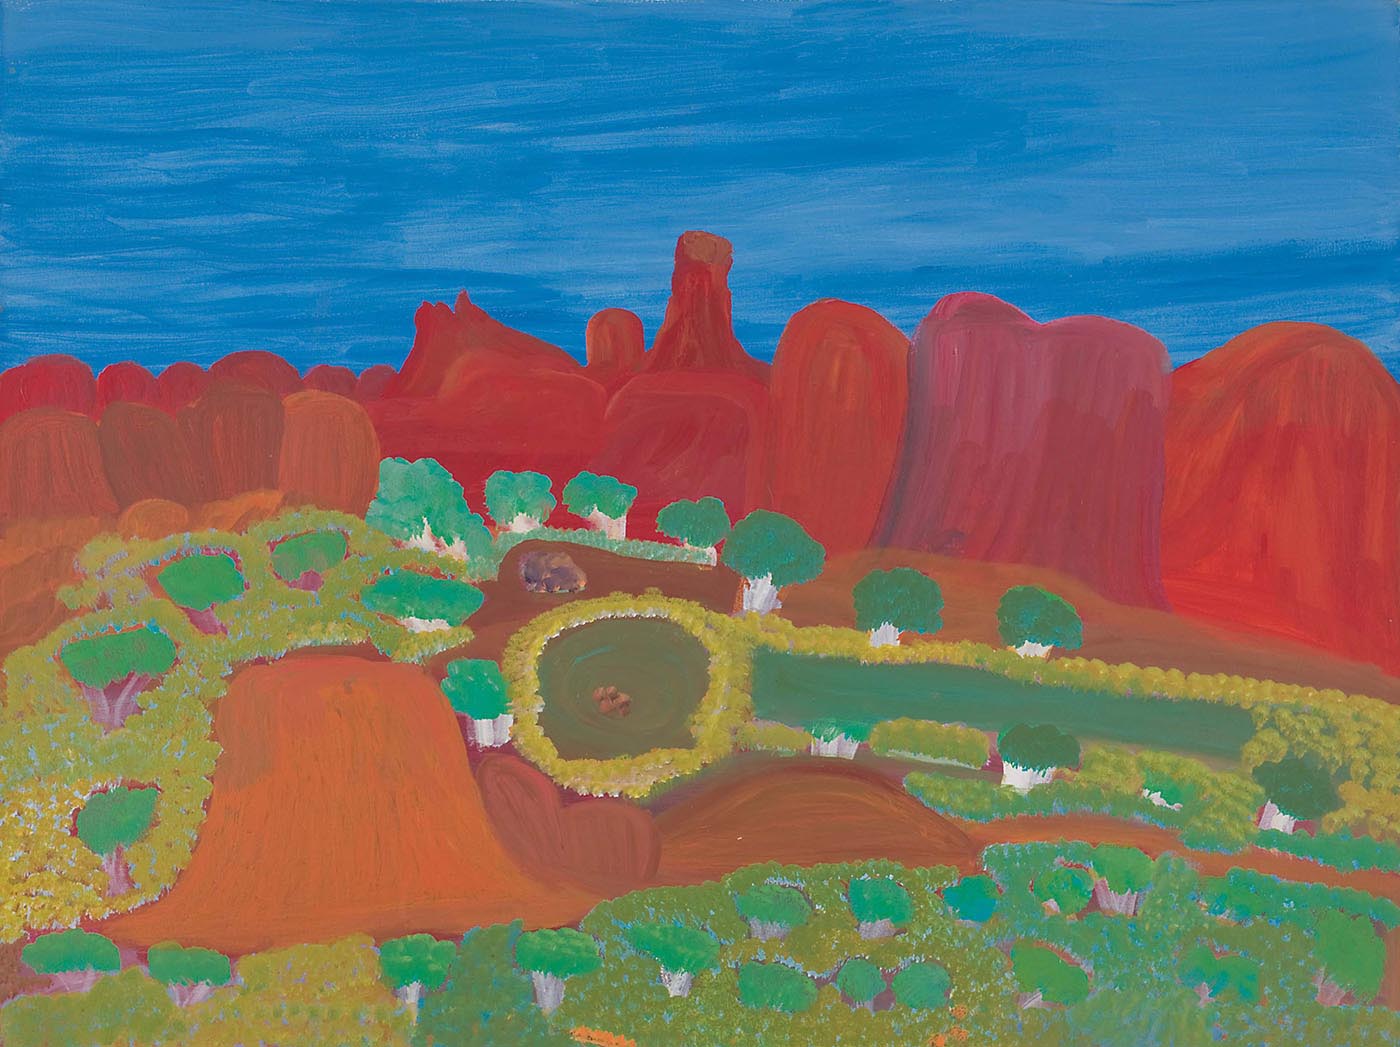 A painting on canvas with a range of orange-red rock formations, including a taller one with a squared top in the centre, against a blue sky in the top section. In the mid ground there are green trees with white trunks and foliage around a circle and rectangle of dark green. In the foreground there is foliage and red ground including an orange red rock-like feature to the left of the painting. - click to view larger image